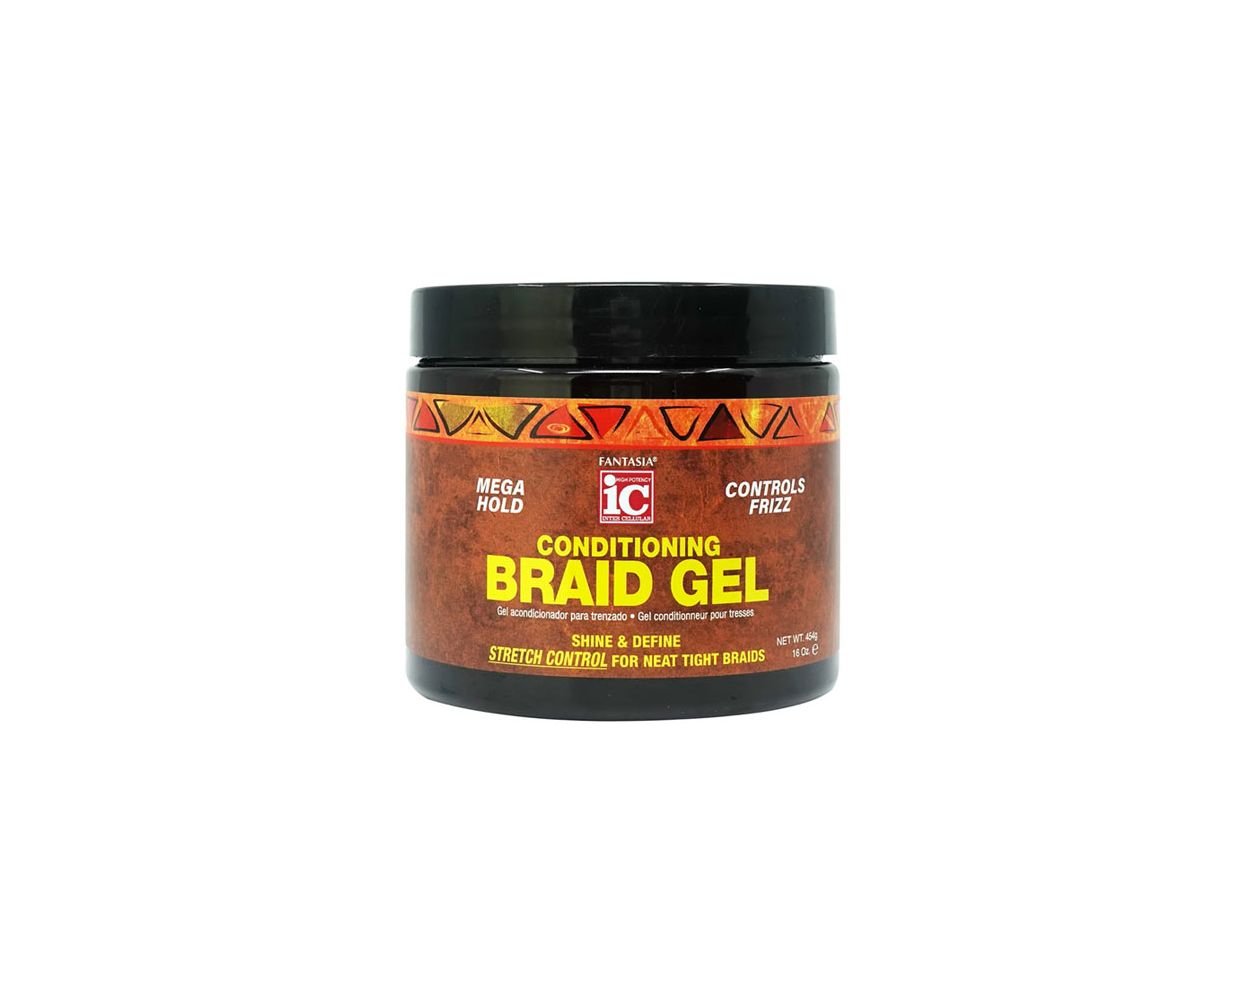 Windsor Beauty Supply in Windsor and London Fantasia Conditioning Braid Gel  16oz